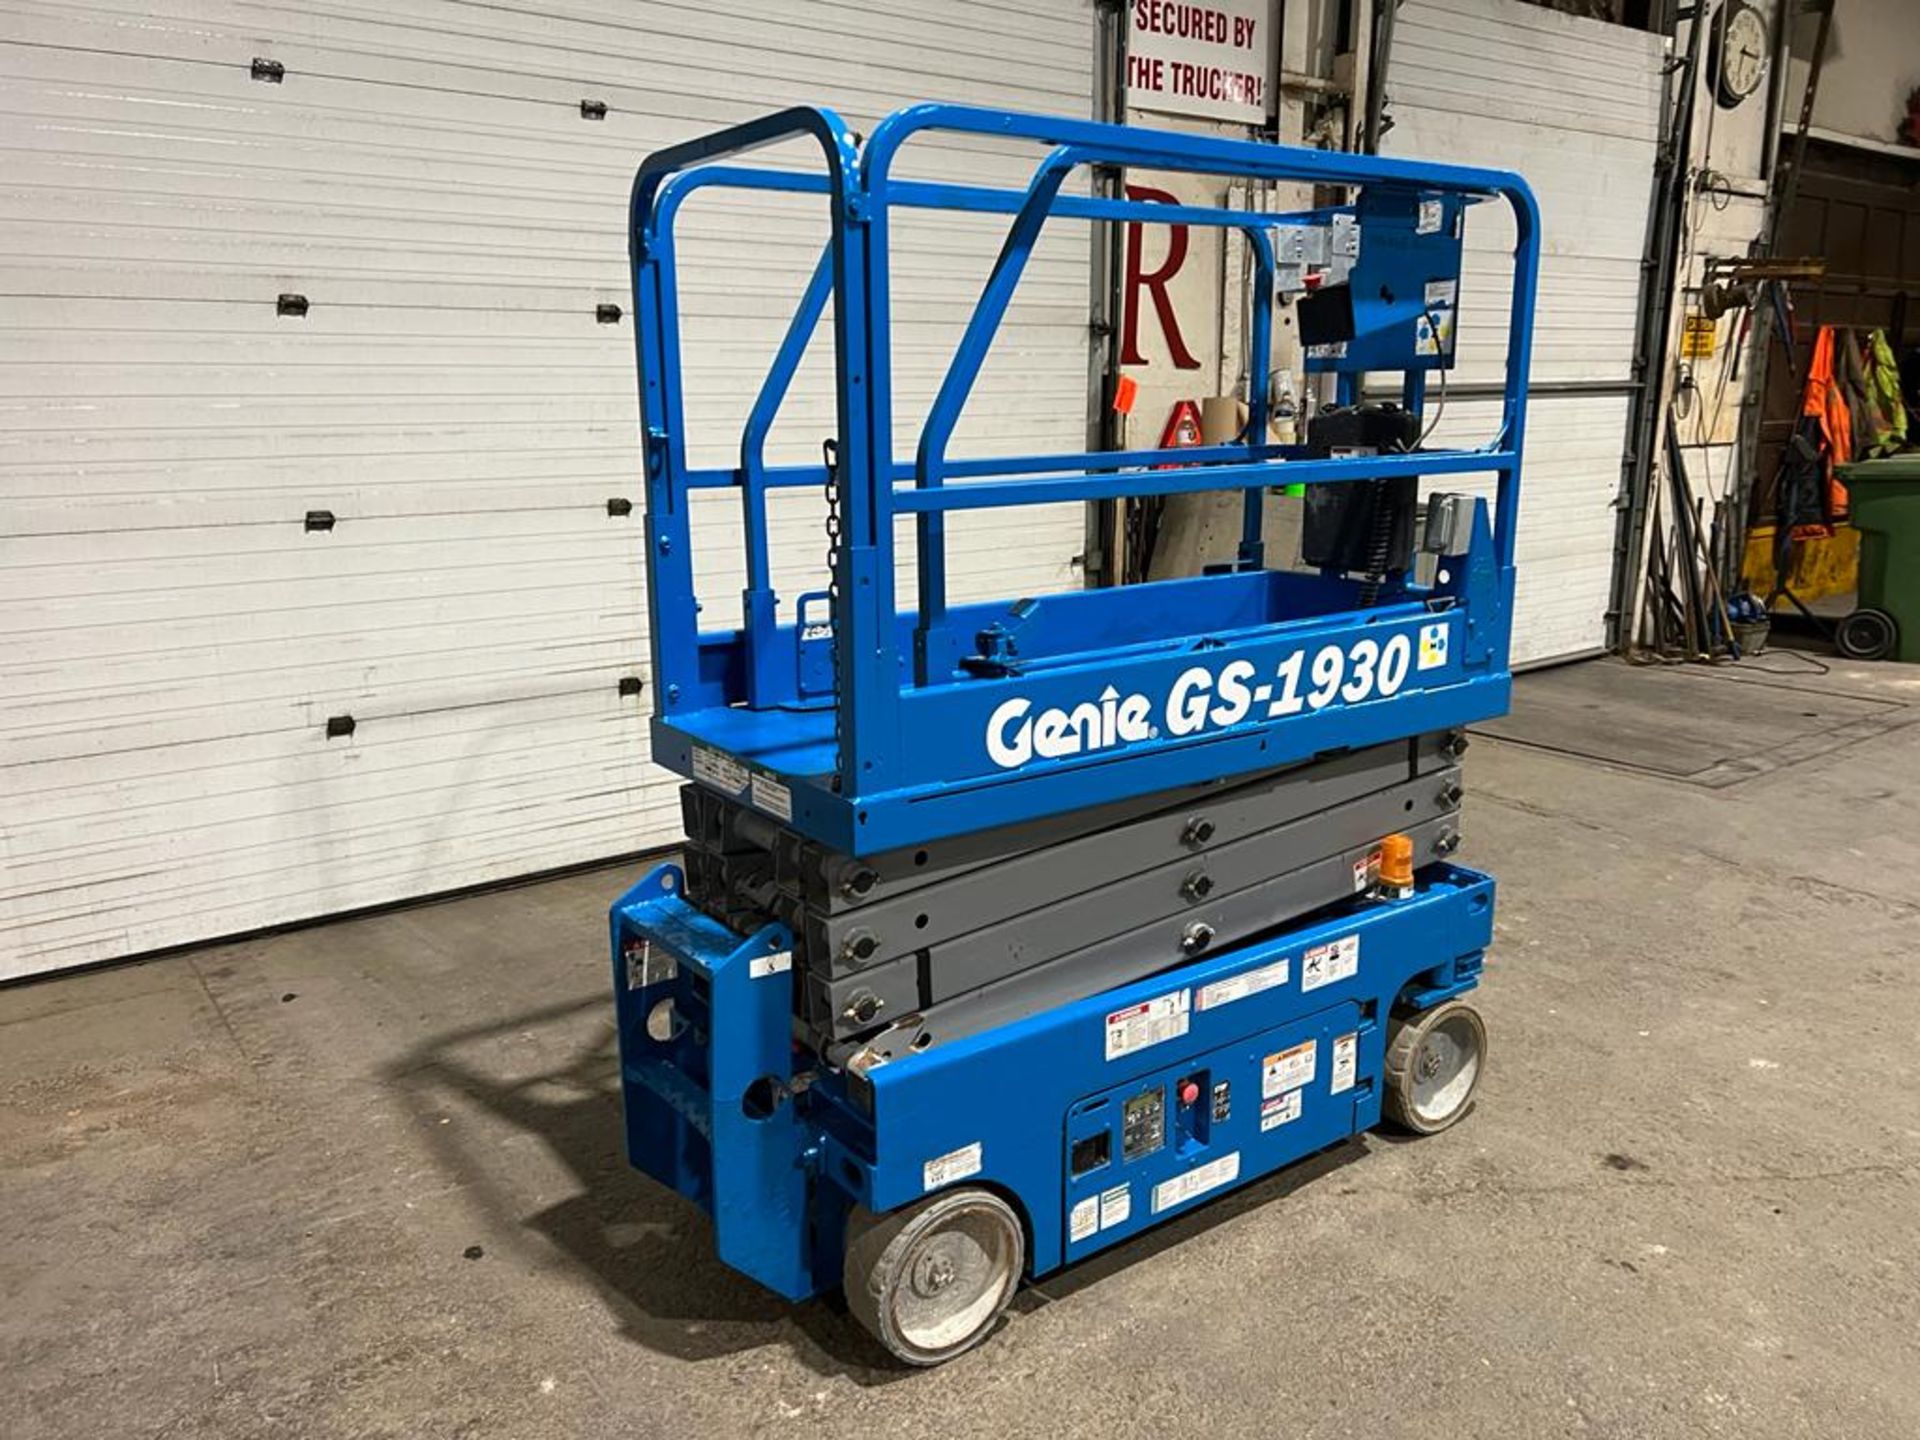 Genie GS-1930 Electric Motorized Scissor Lift - with Extendable Platform Deck with pendant - Image 2 of 2